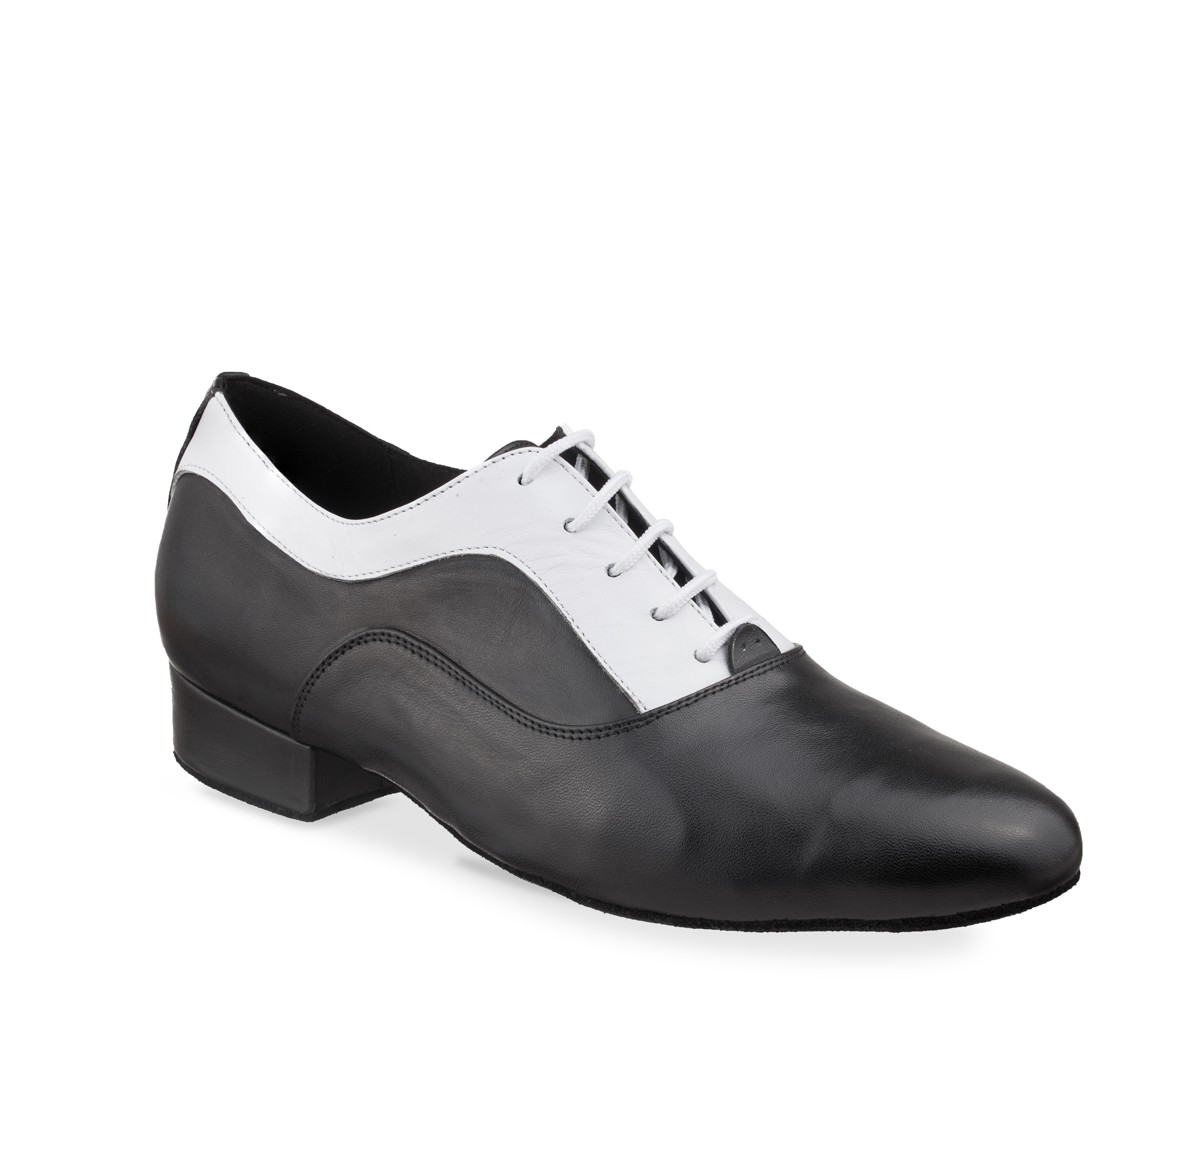 mens black and white dance shoes